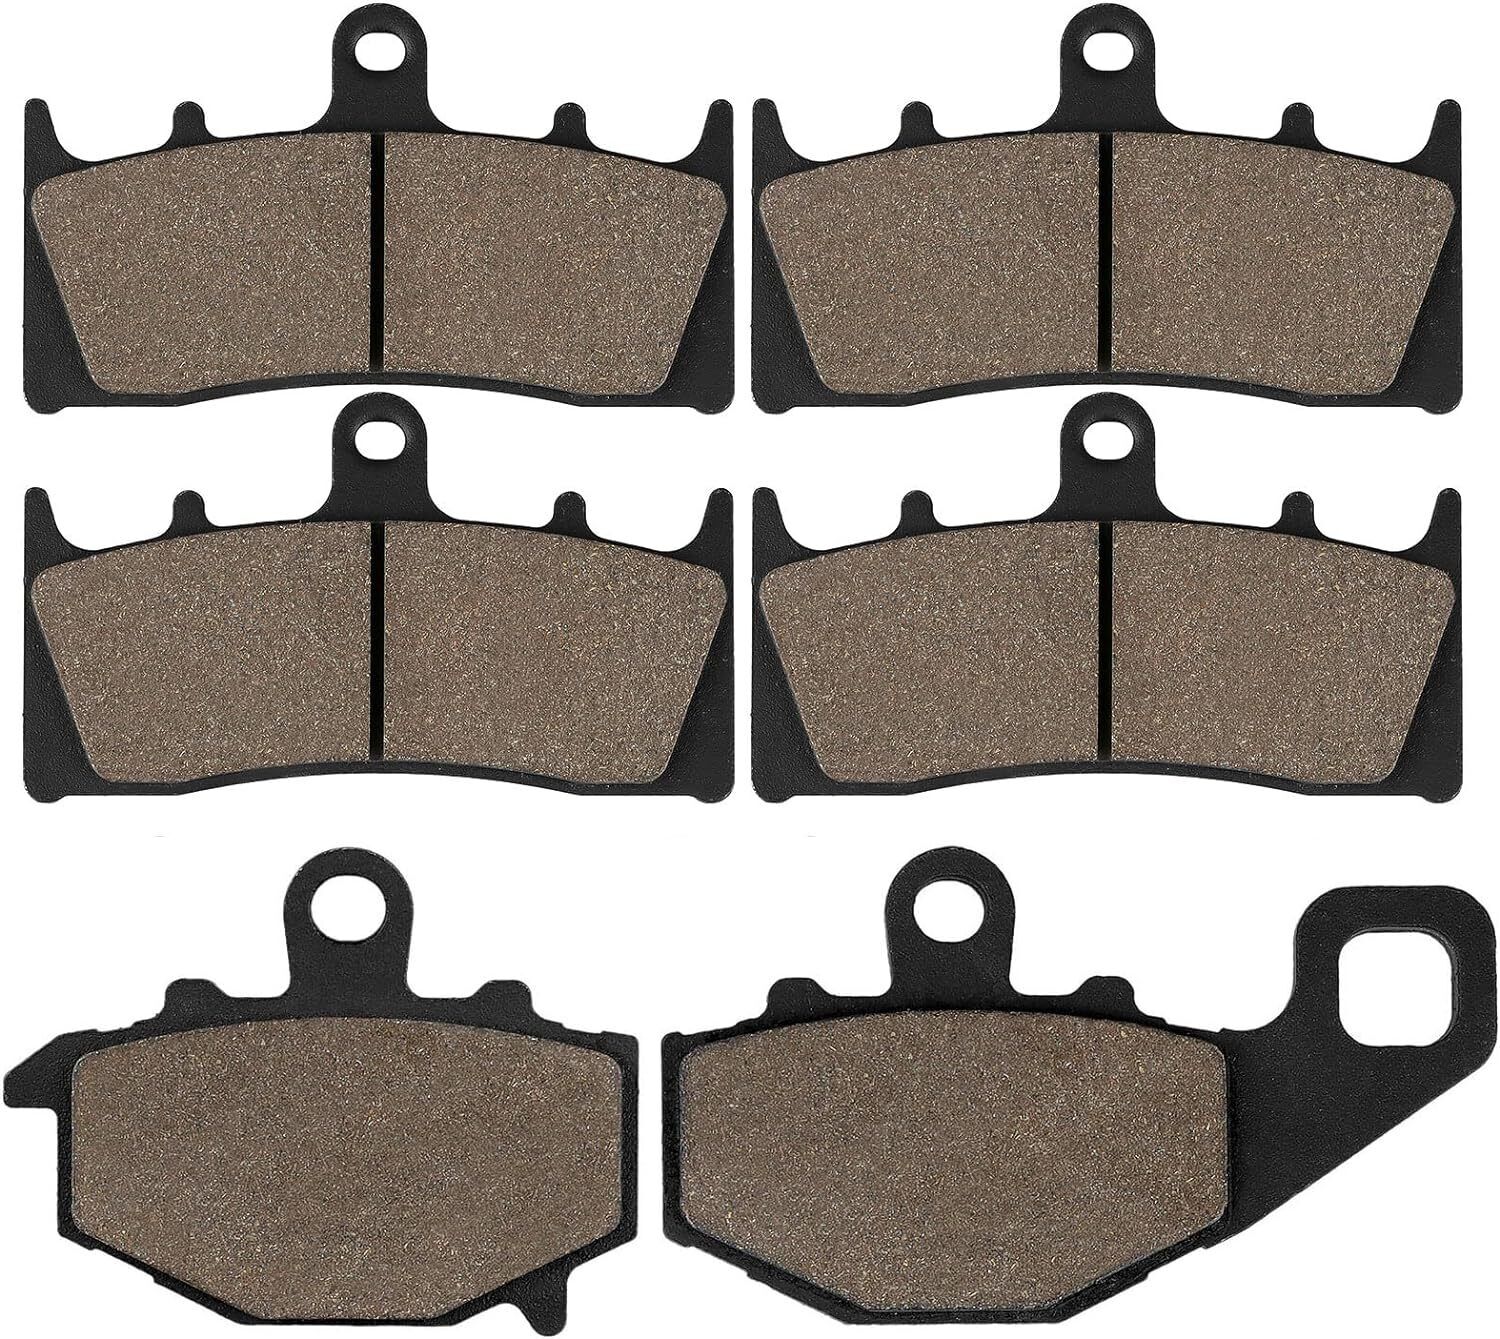 Front and Rear Brake Pads for Kawasaki ZX6R ZX-6R ZX600 1998-2001, ZZR600ZX 600